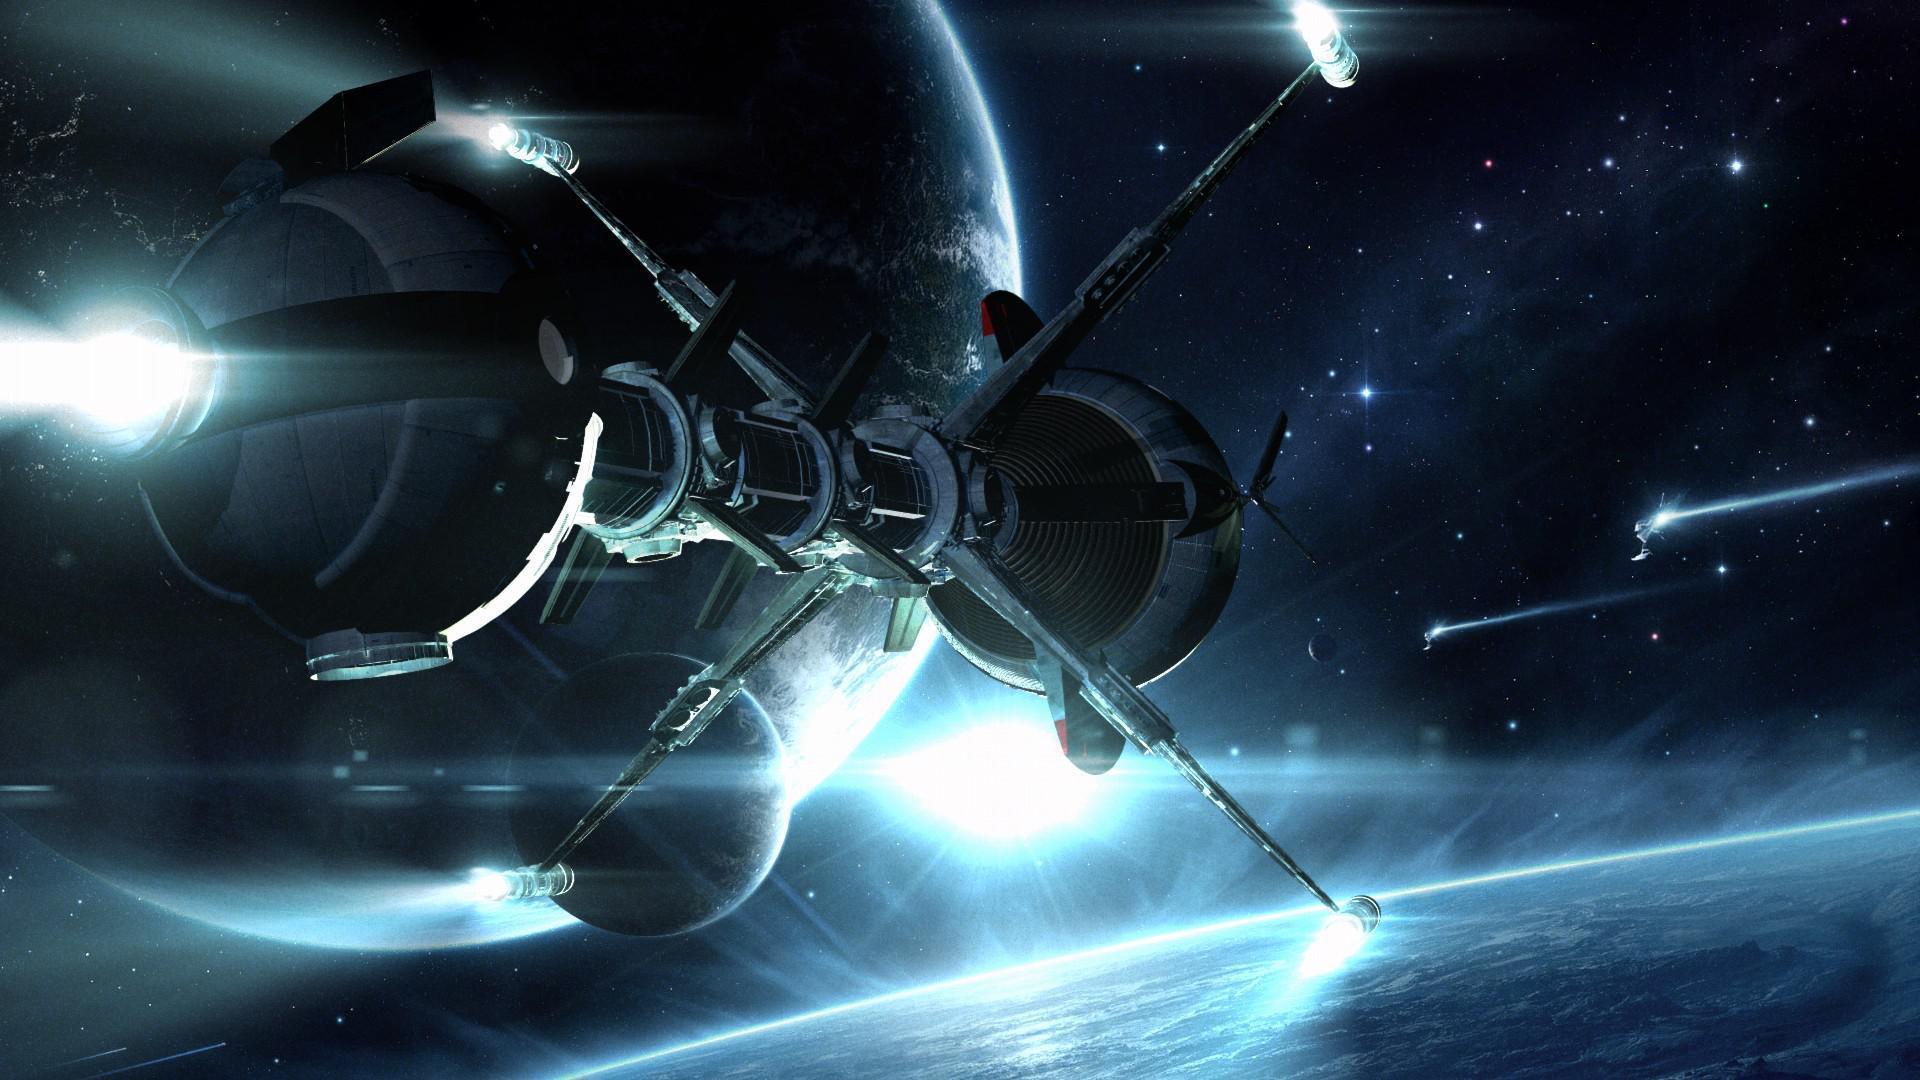 1300 Spaceship HD Wallpapers and Backgrounds